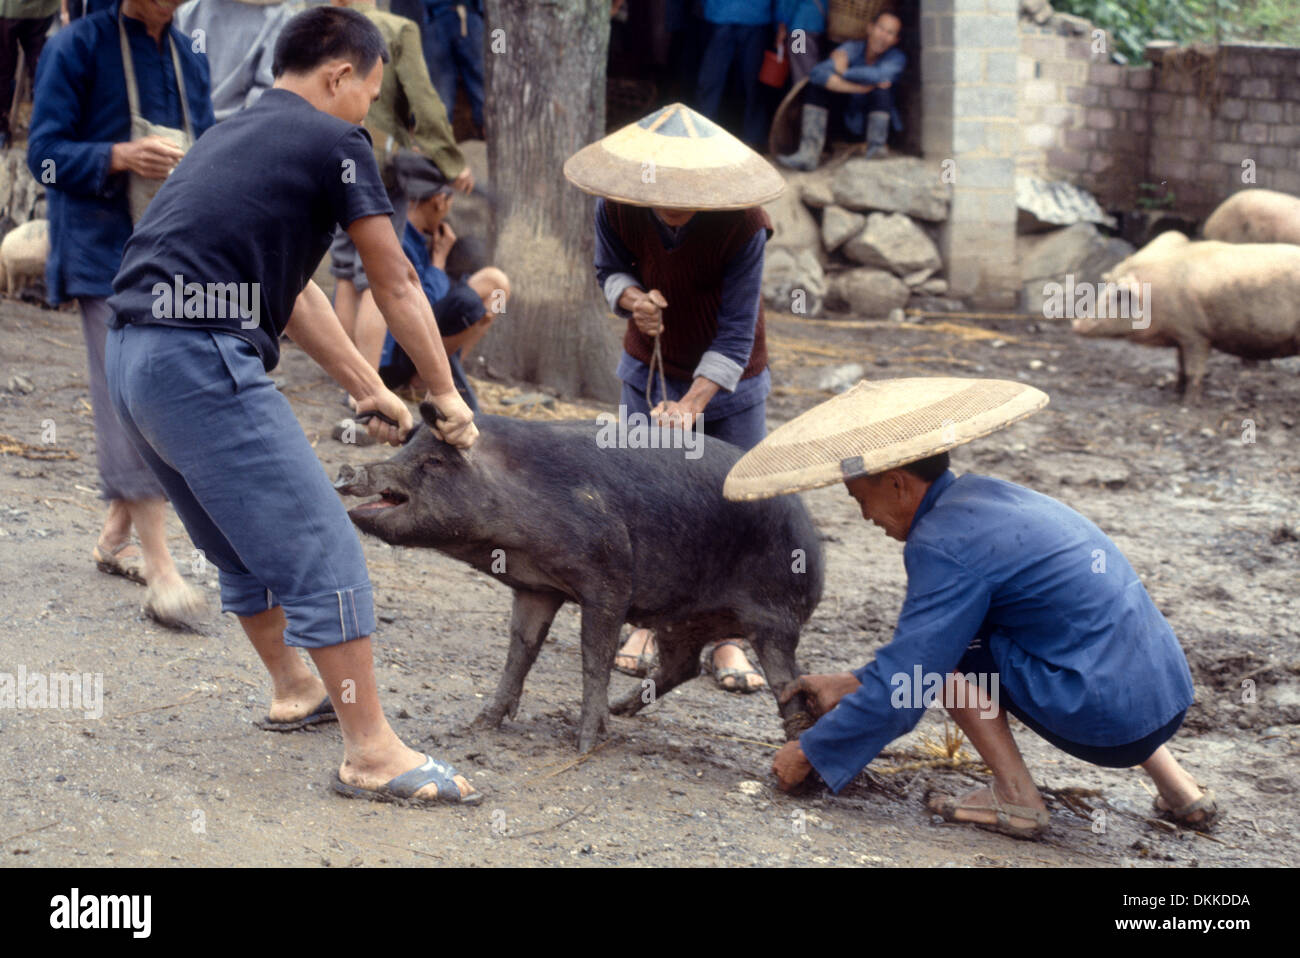 Three men co-operate to control the pig they just bought from the animal market in Hunan Province, China Stock Photo